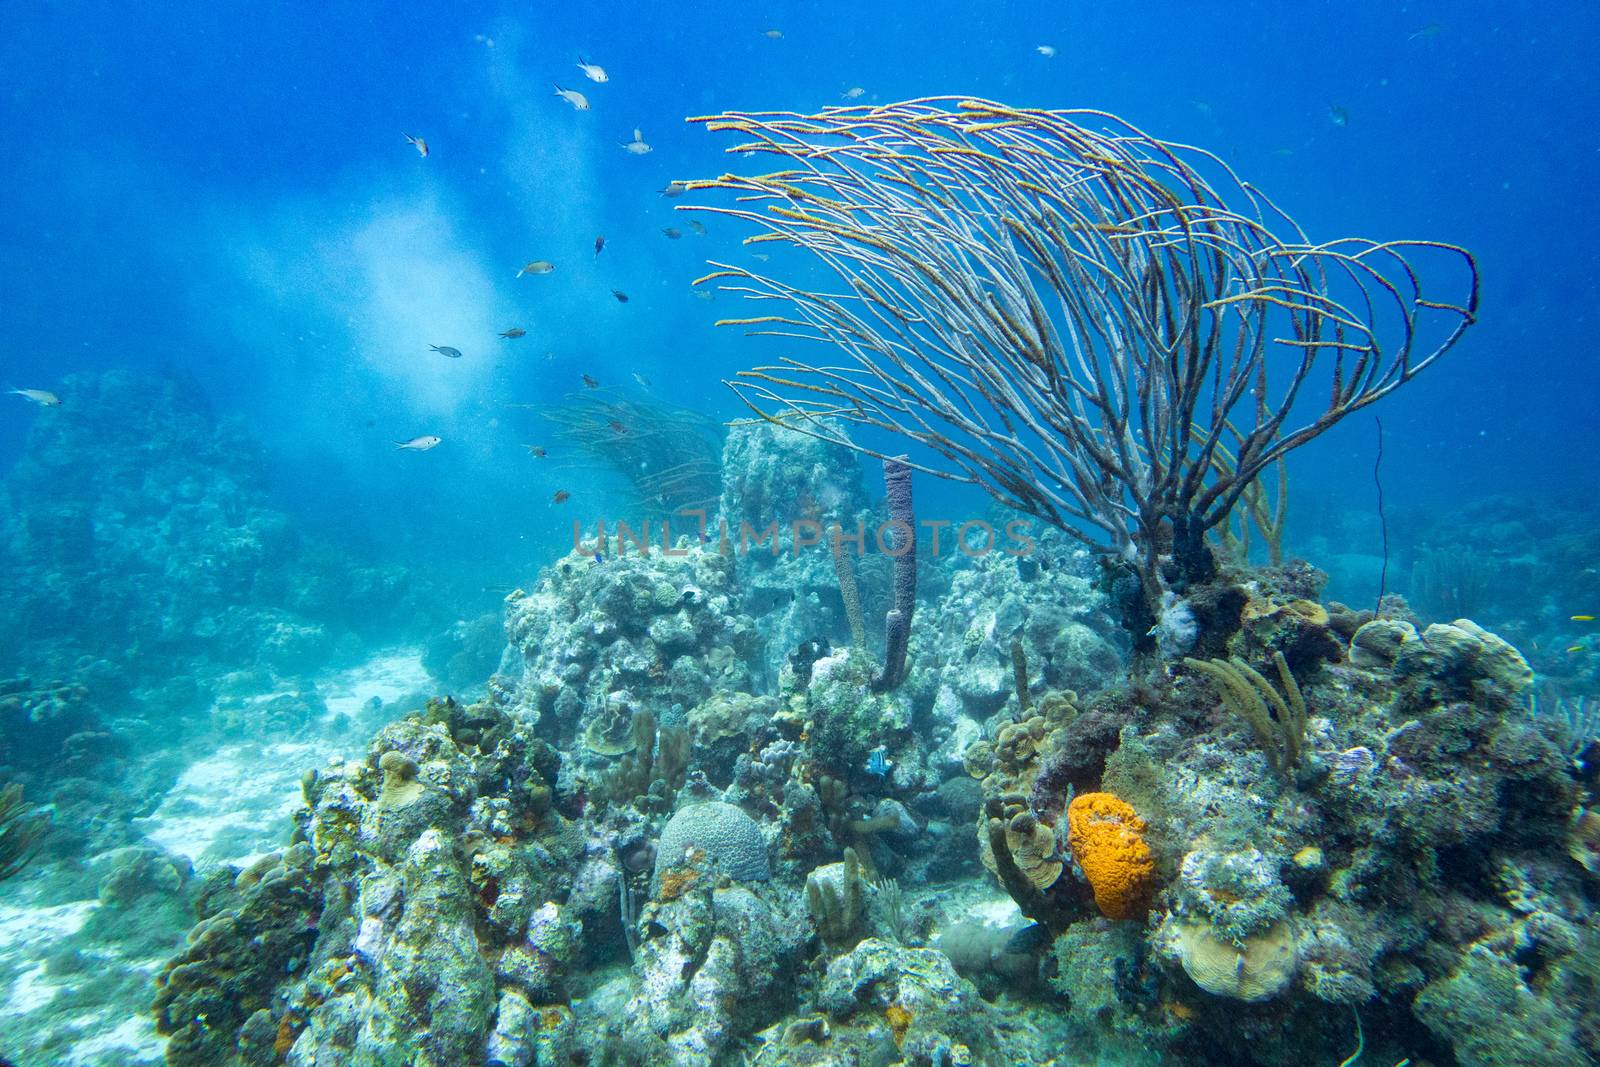 Coral reef landscape with branch coral, sponges, fish and sediment underwater.